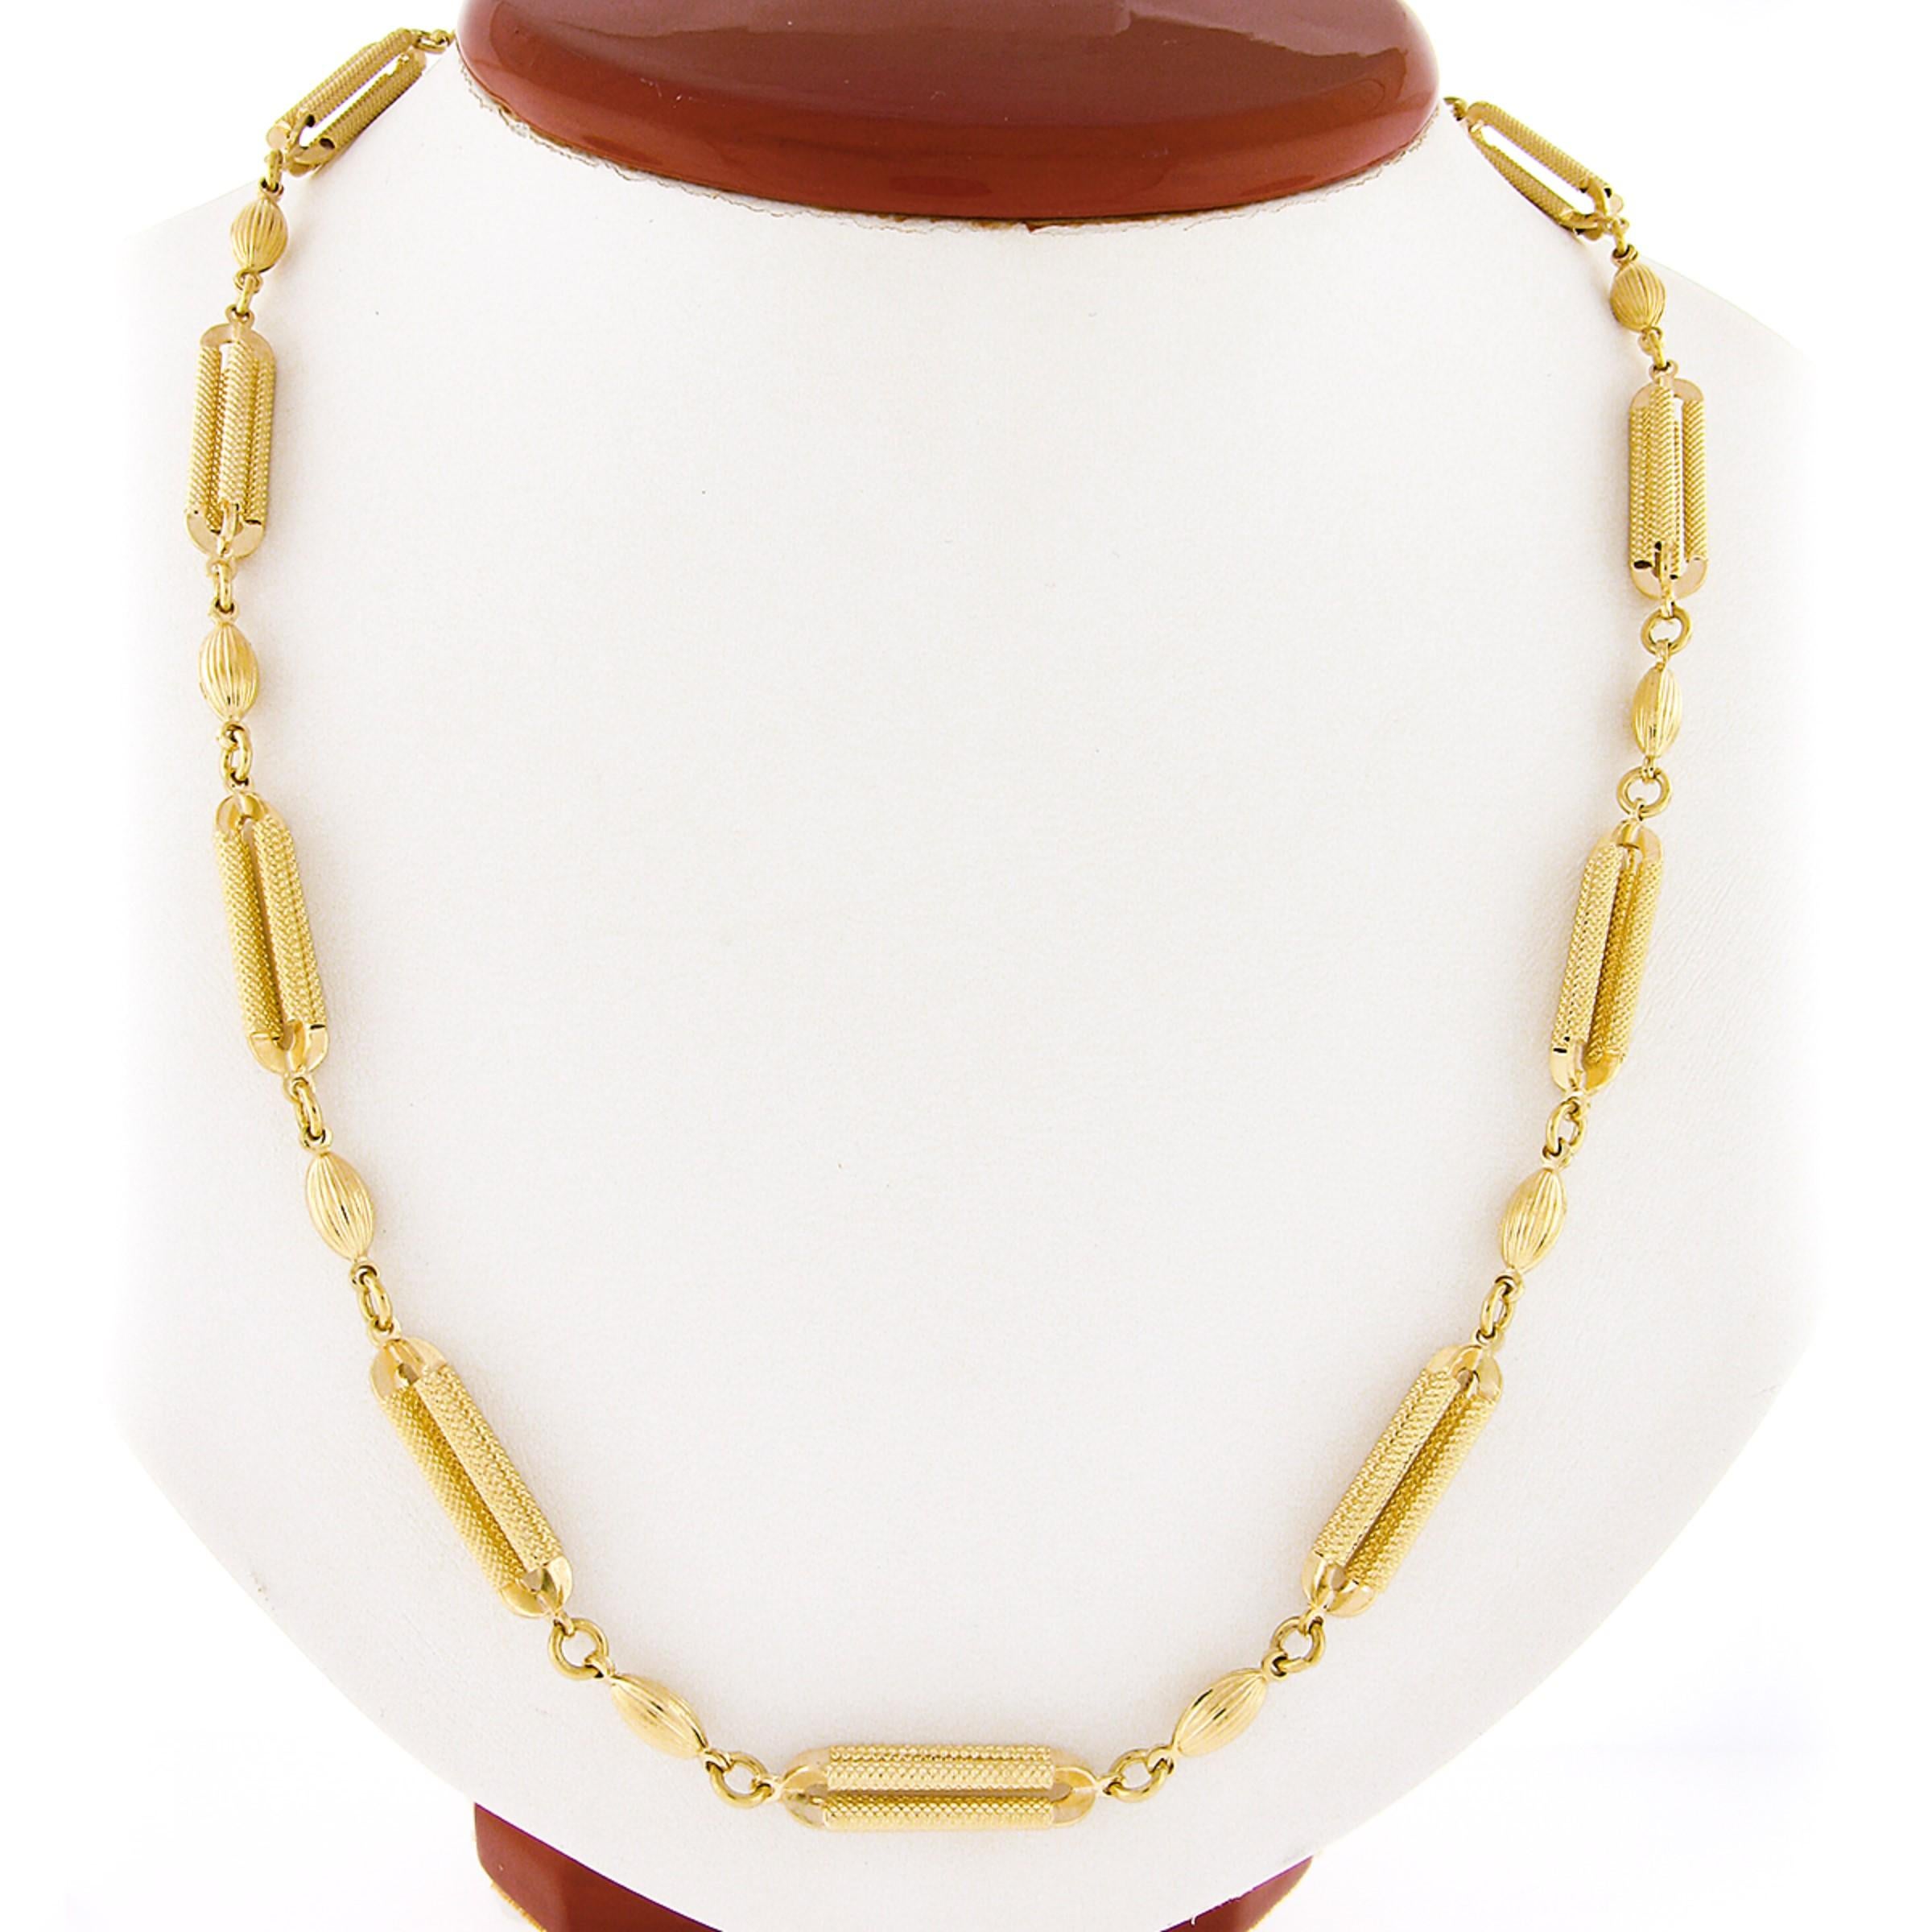 This fancy chain necklace is well crafted in solid 14k yellow gold and features a beautiful design that alternates with unique, open, textured bar links and grooved oval beads throughout. The textured links look absolutely wonderful next to the